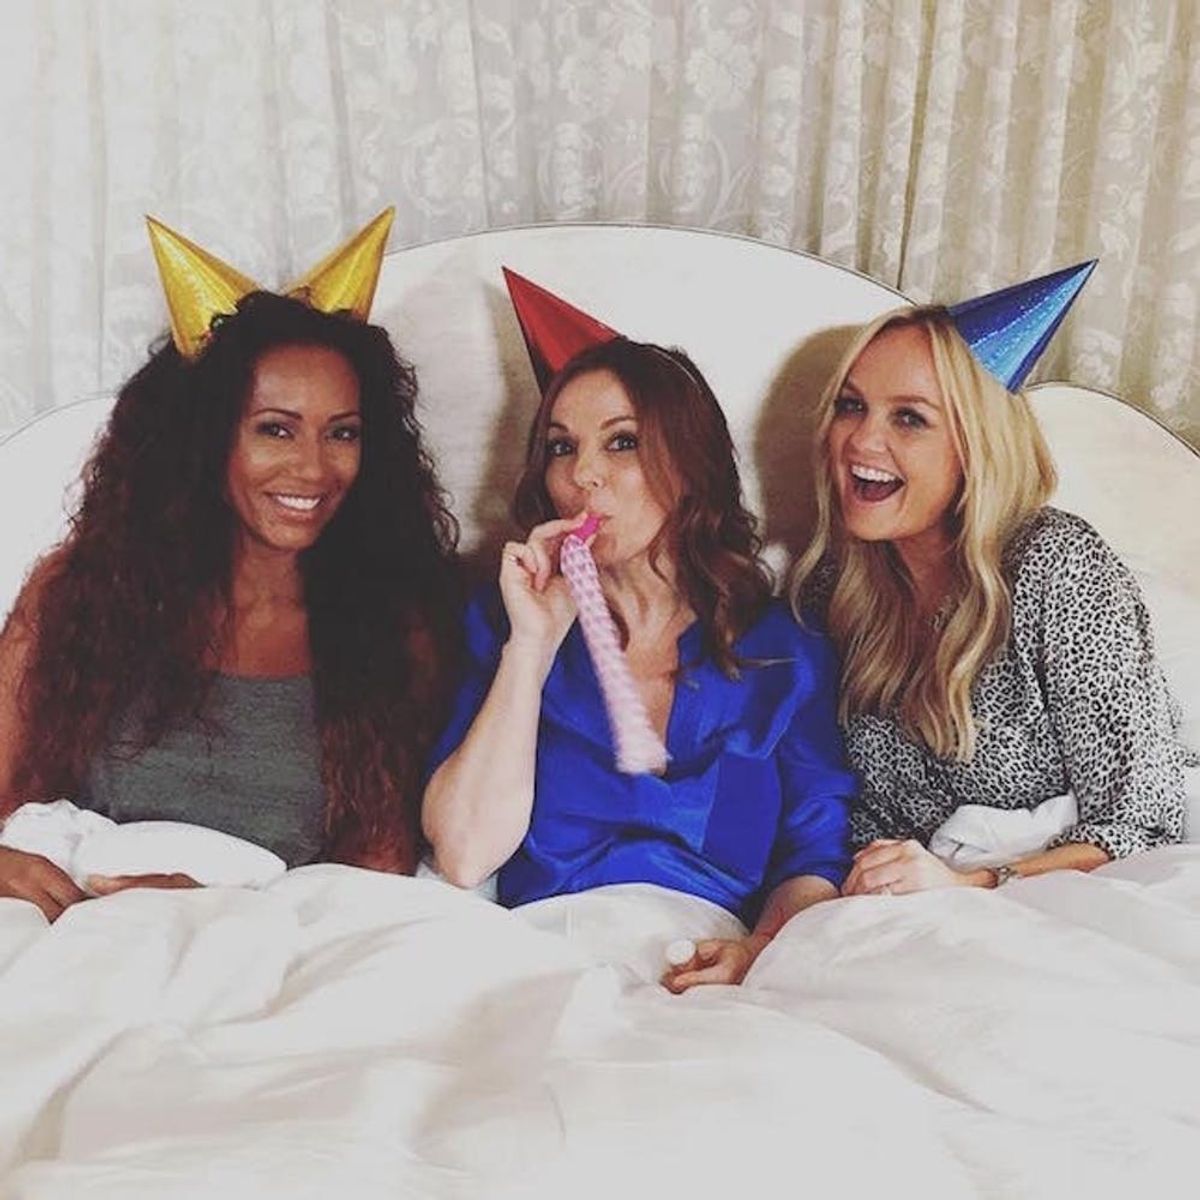 OMG: The New Spice Girls Spinoff Song Is HERE